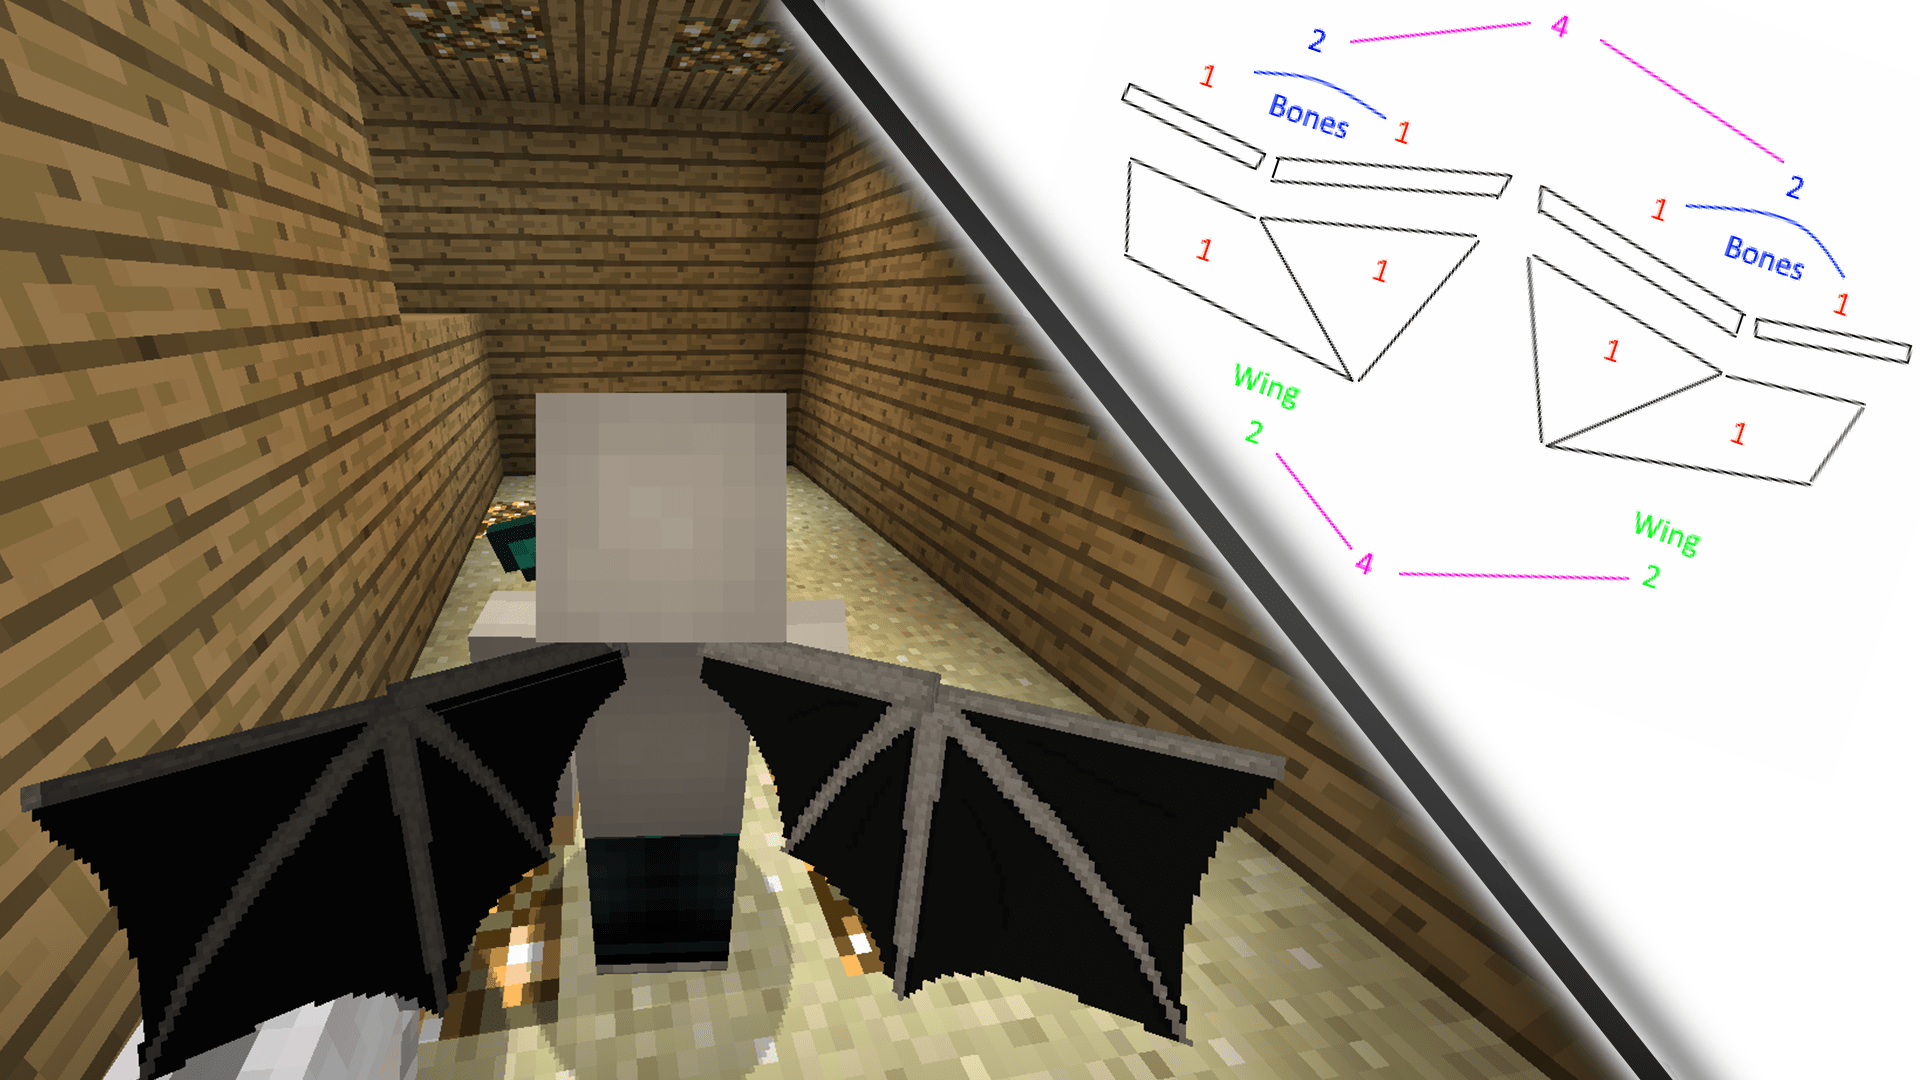 LabyMod Wings entered the Shop